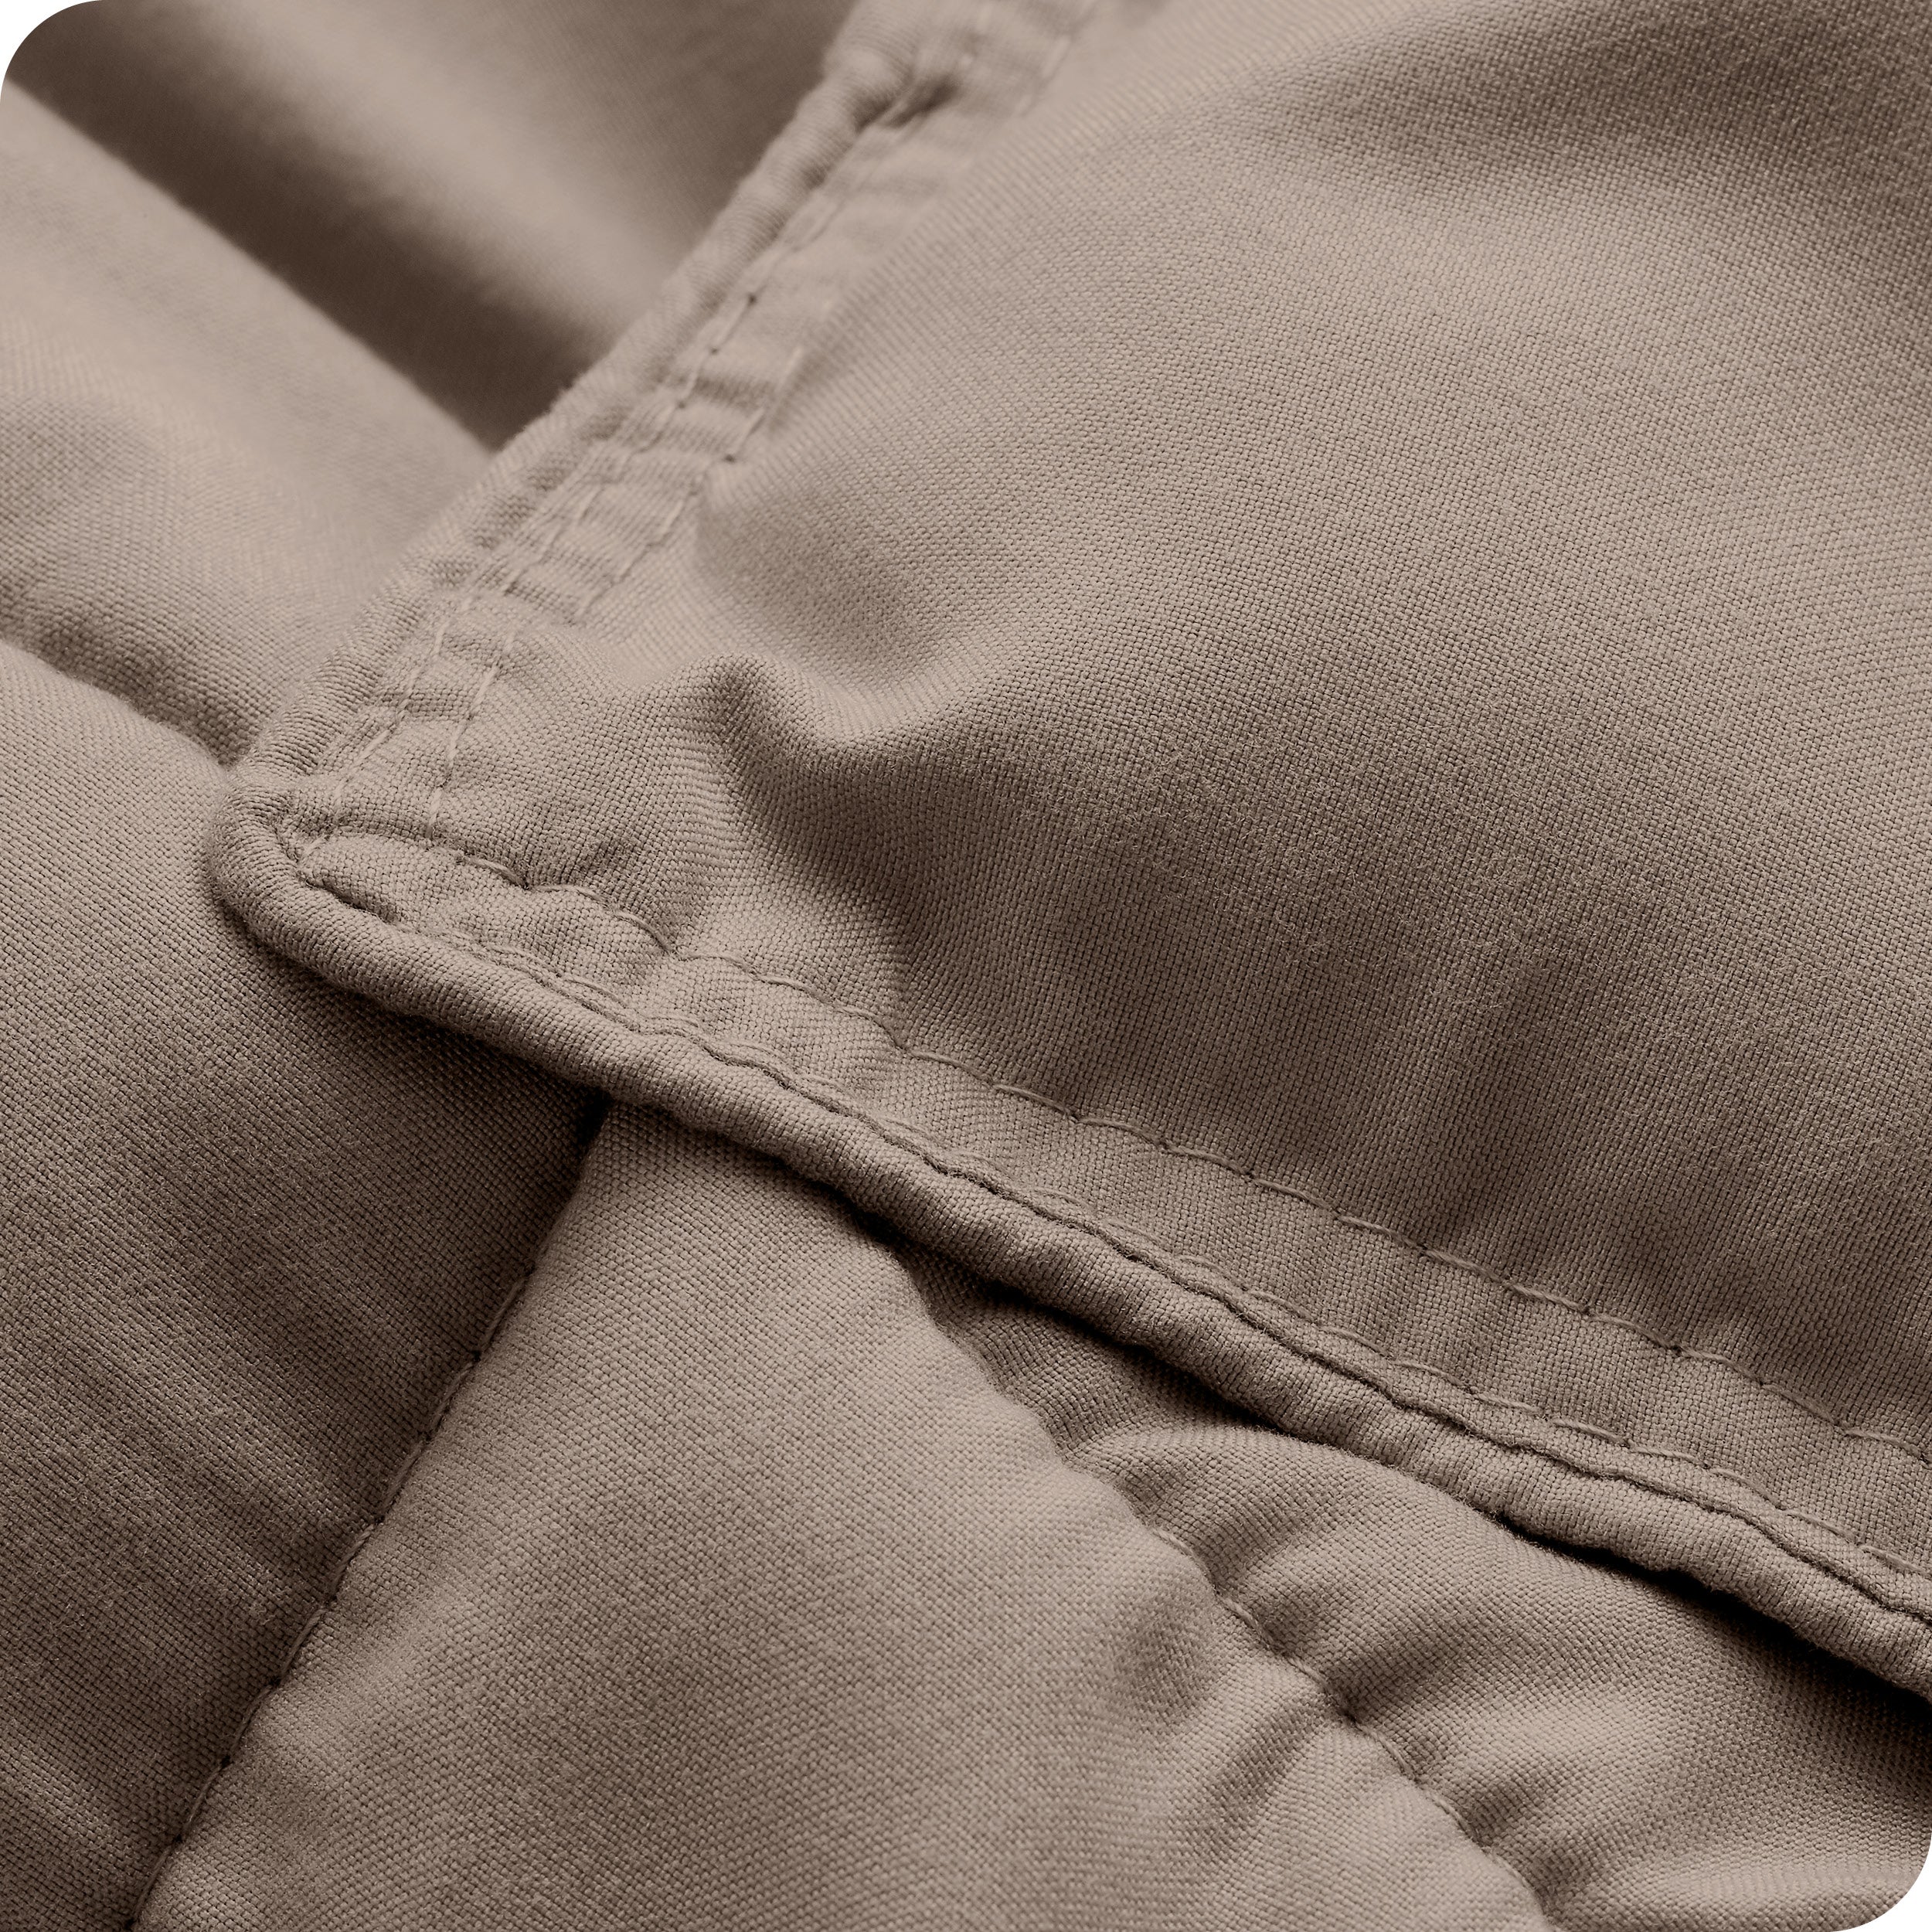 A close up of a corner of the microfiber comforter